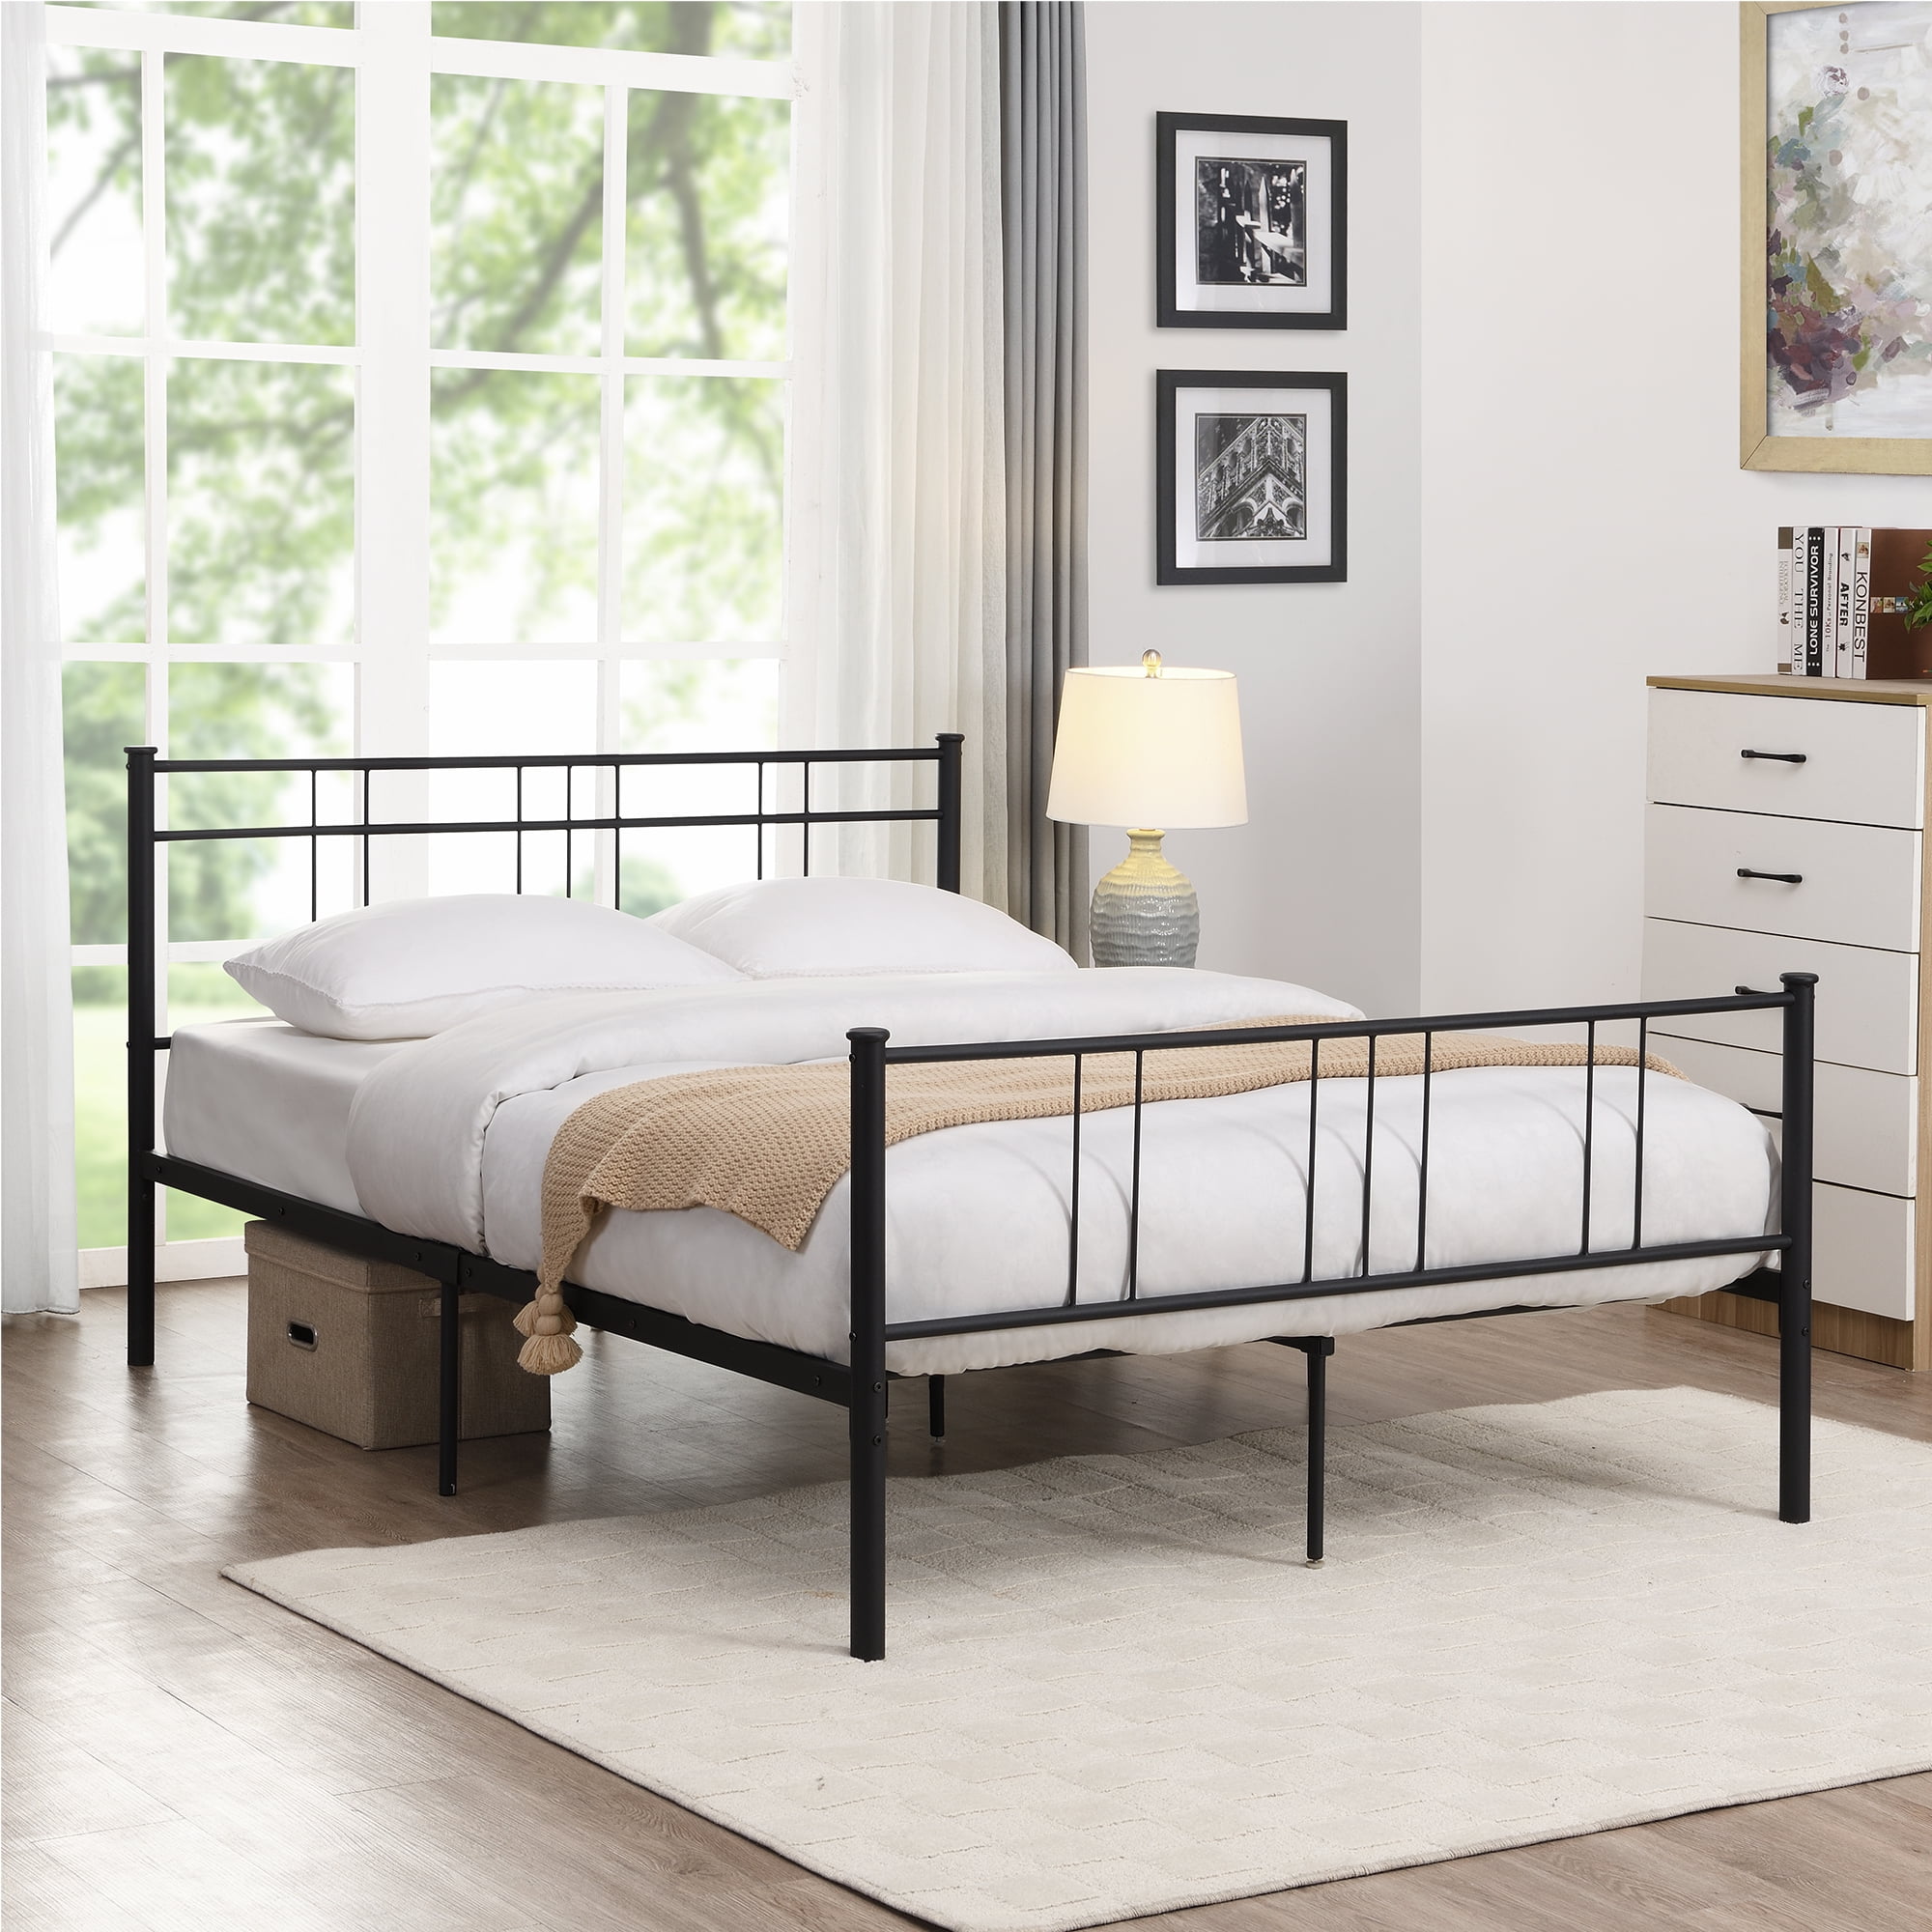 Metal Bed Frame With Headboard, Full Size Metal Bed Frame No Headboard